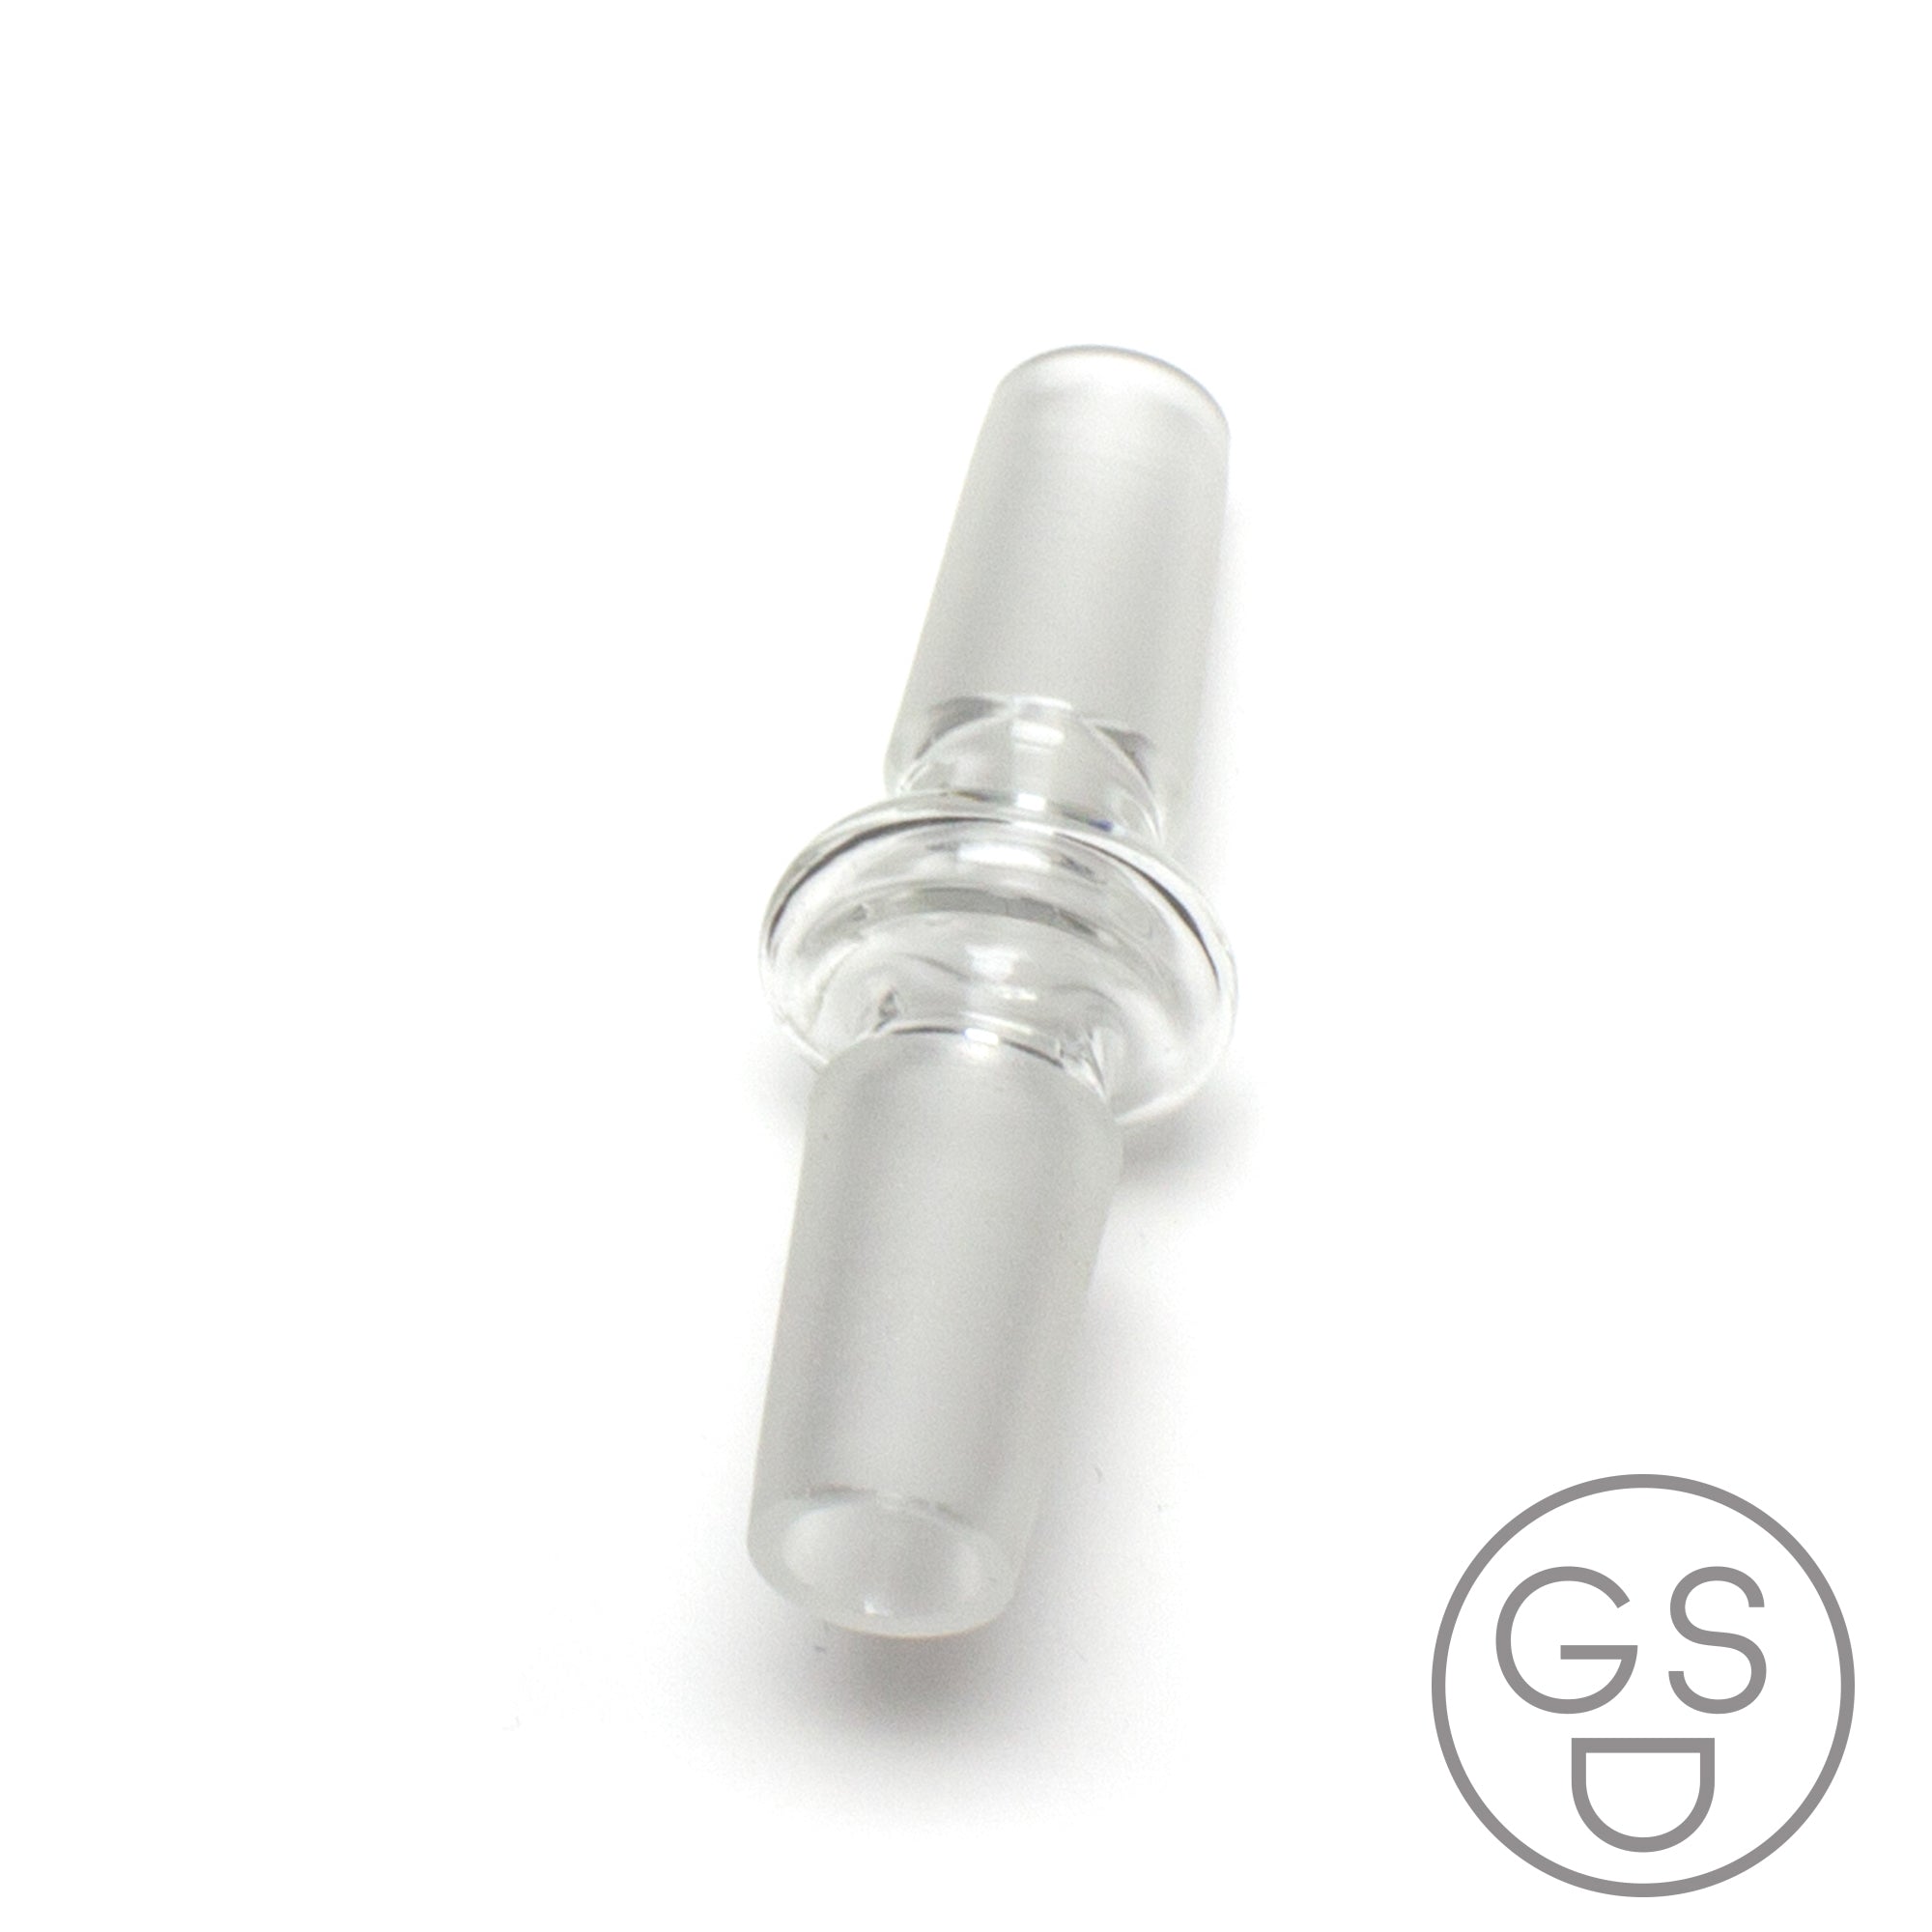 Male To Male Glass Adapter